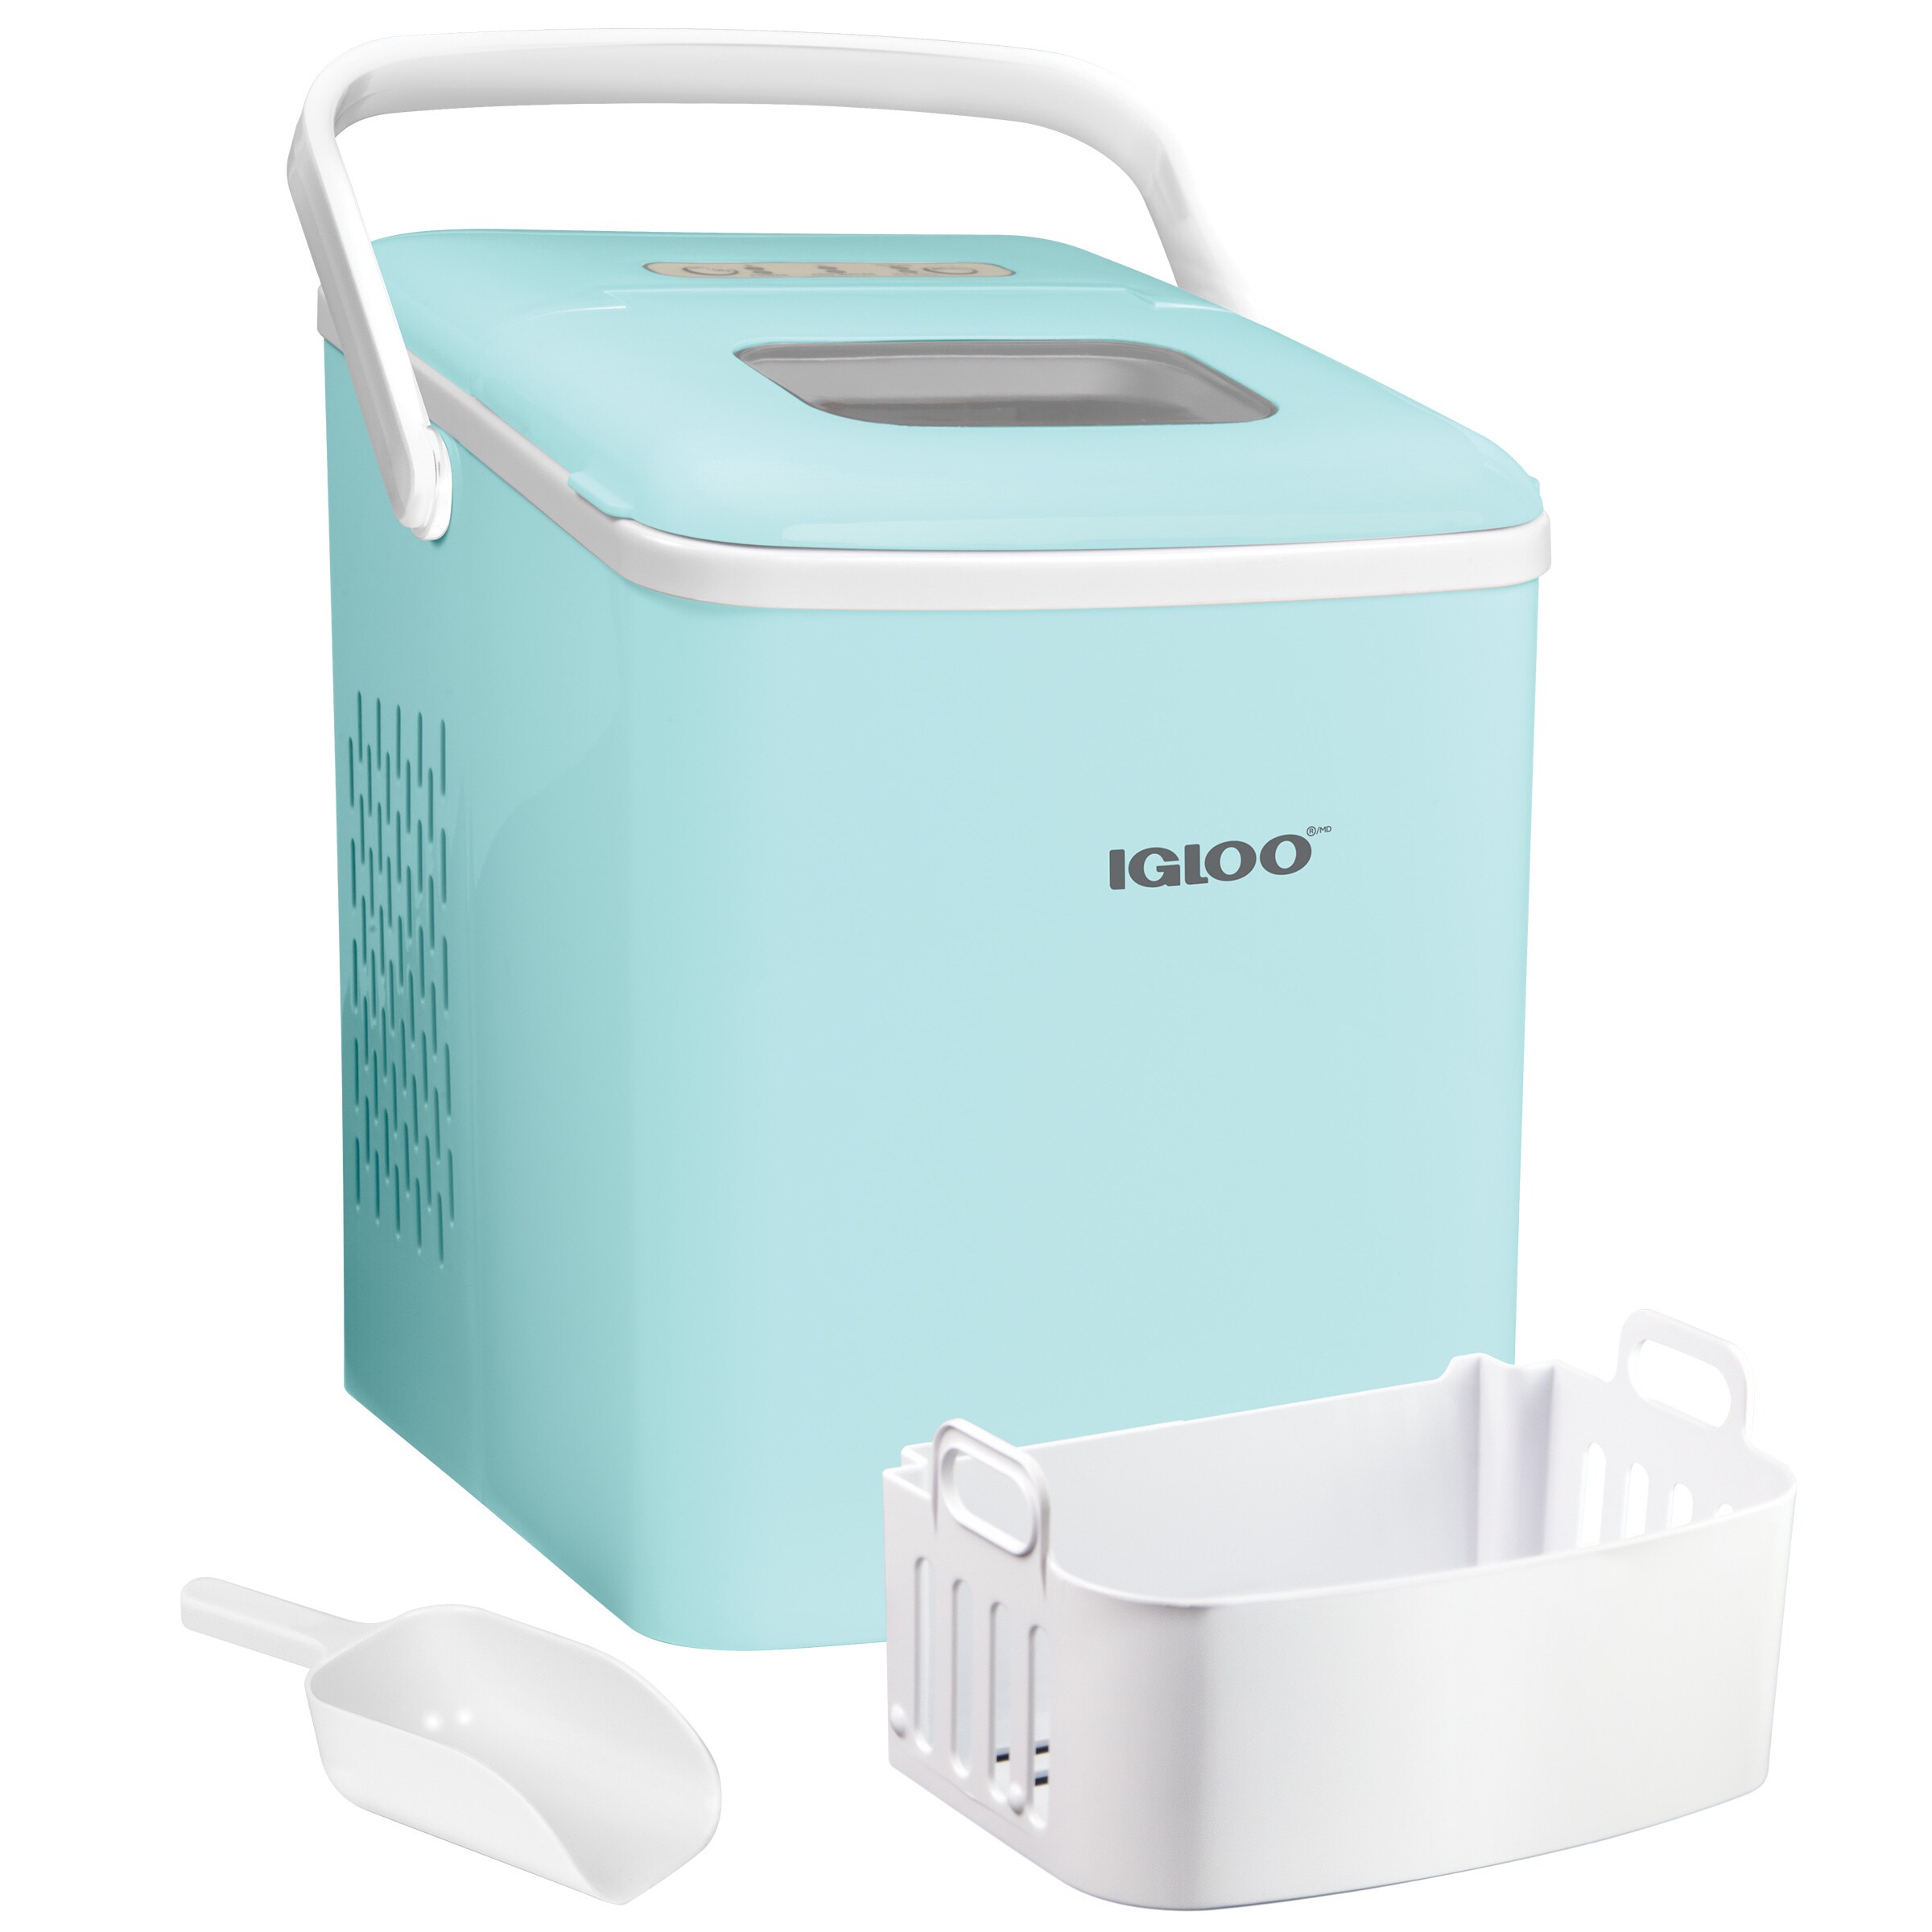 Igloo ICE103 Counter Top Ice Maker with Over-Sized Ice Bucket, Stainless  Steel & 4 Ounce Stainless Steel Ice Scoop